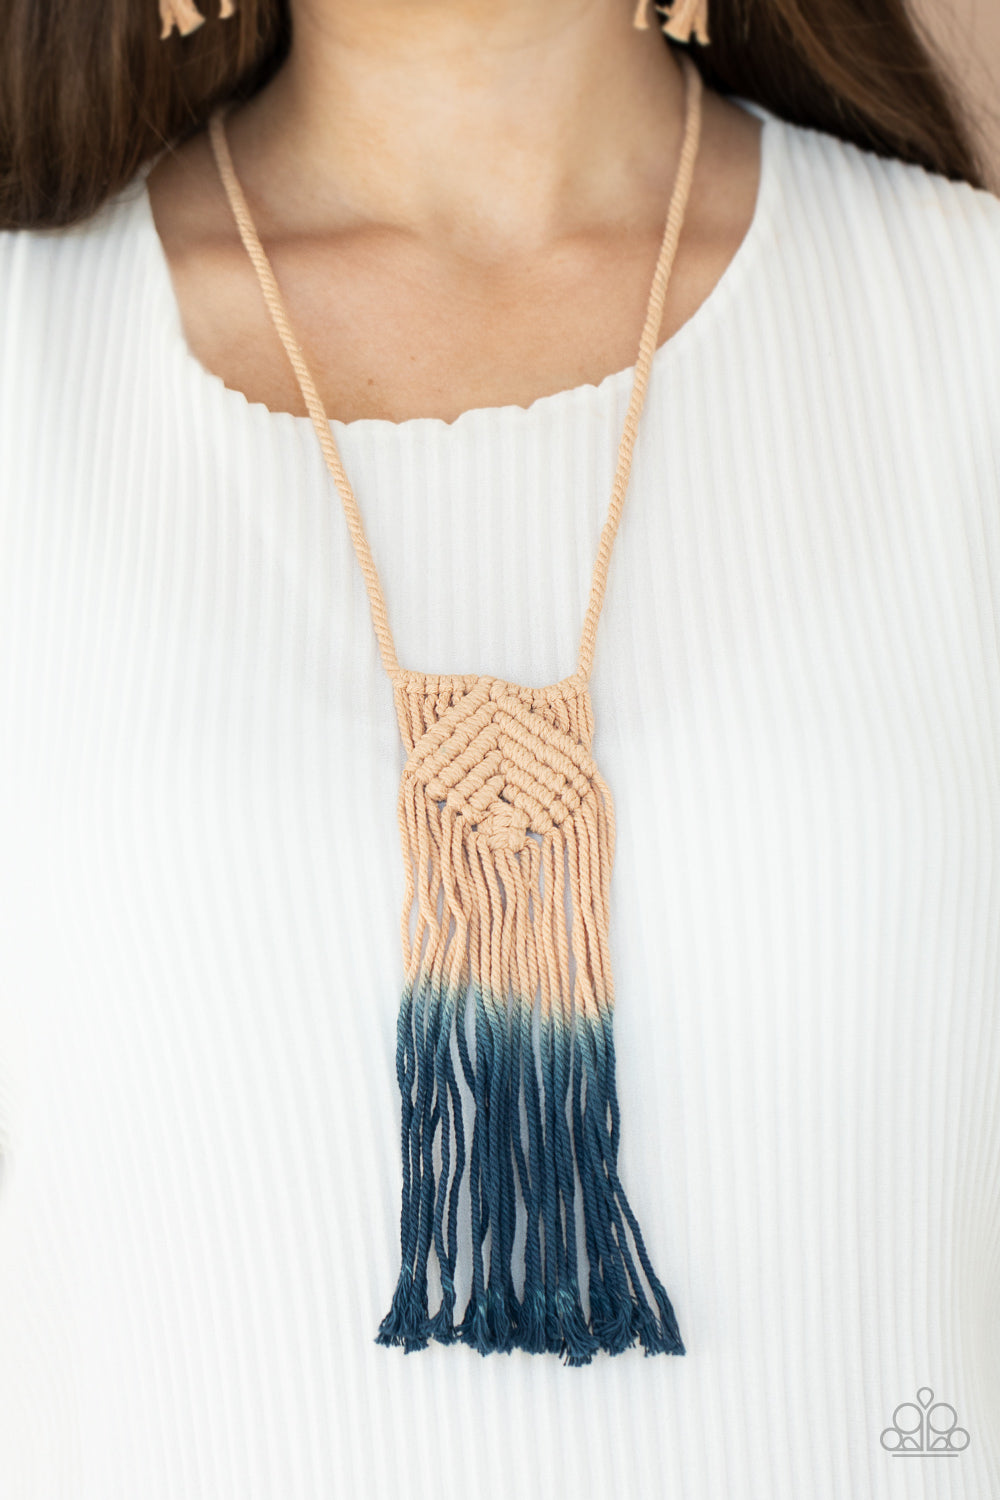 Look At MACRAME Now - Blue - Gtdazzlequeen